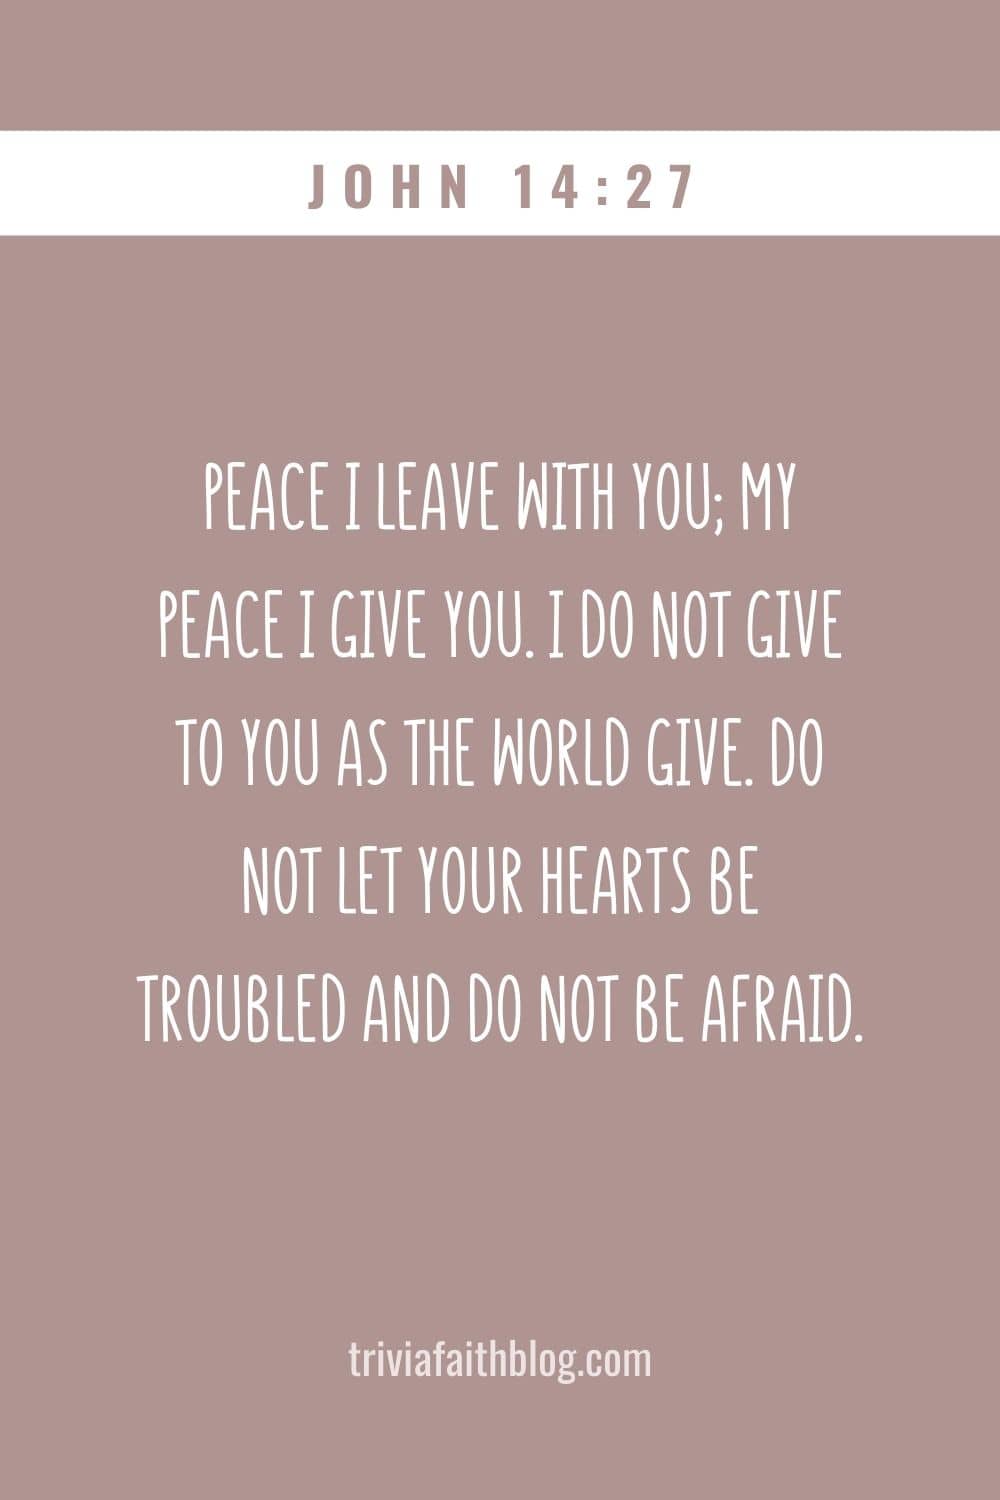 Peace I leave with you; my peace I give you. I do not give to you as the world give. Do not let your hearts be troubled and do not be afraid